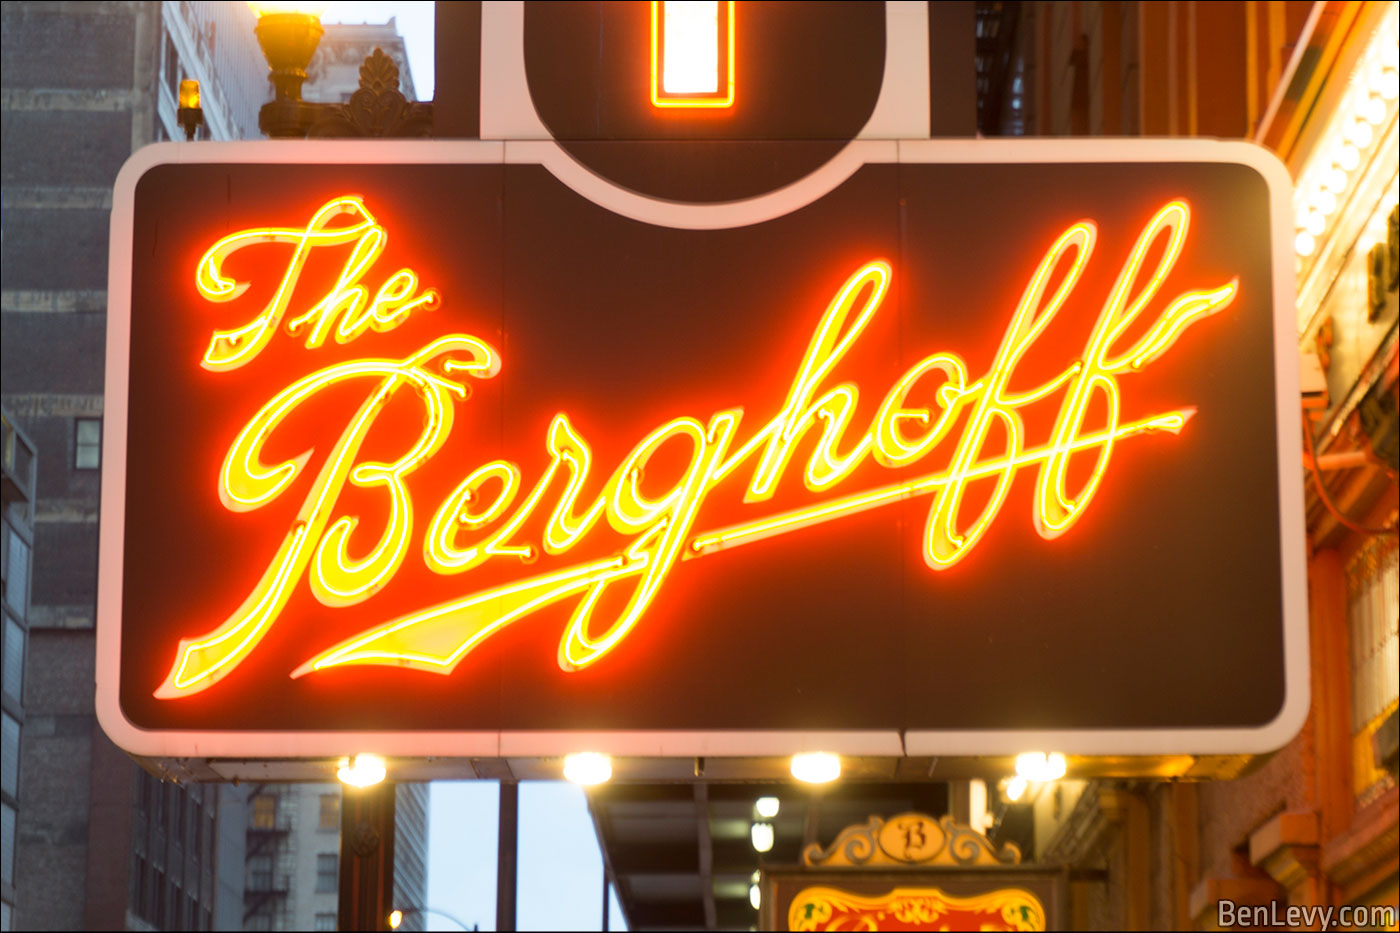 The Neon Sign For The Berghoff Restaurant